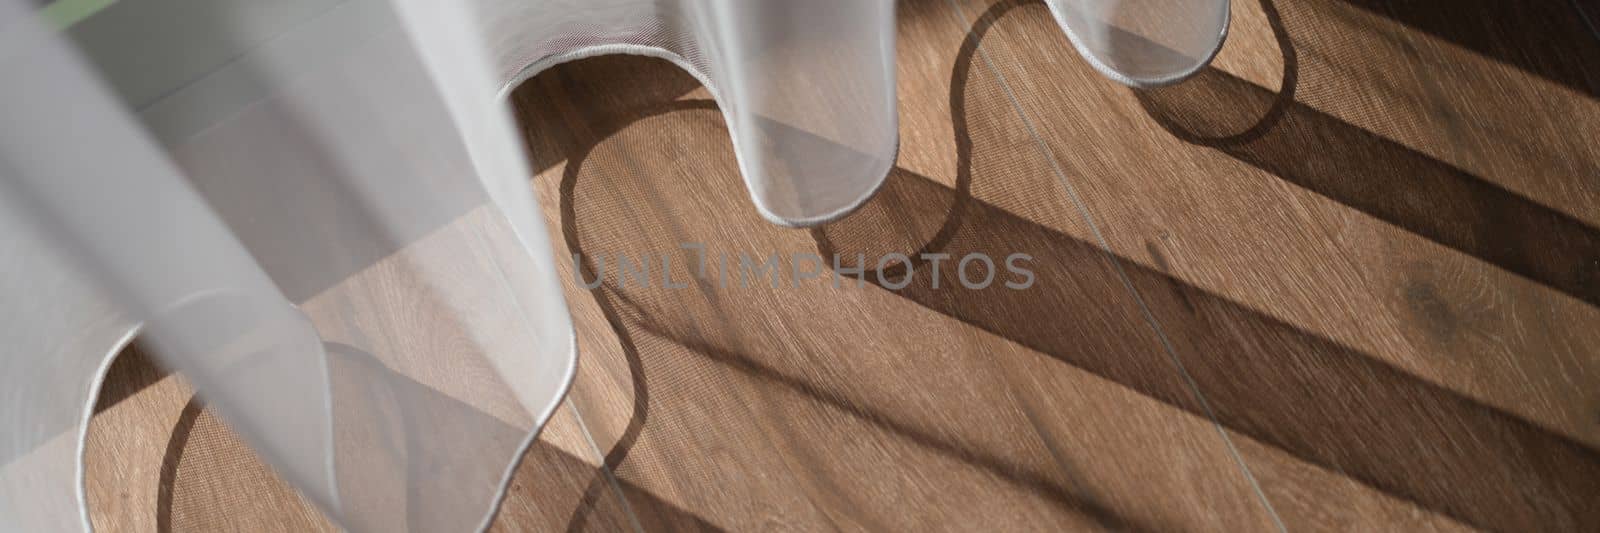 White curtains in midday sun create shade on brown wood floor in room by kuprevich